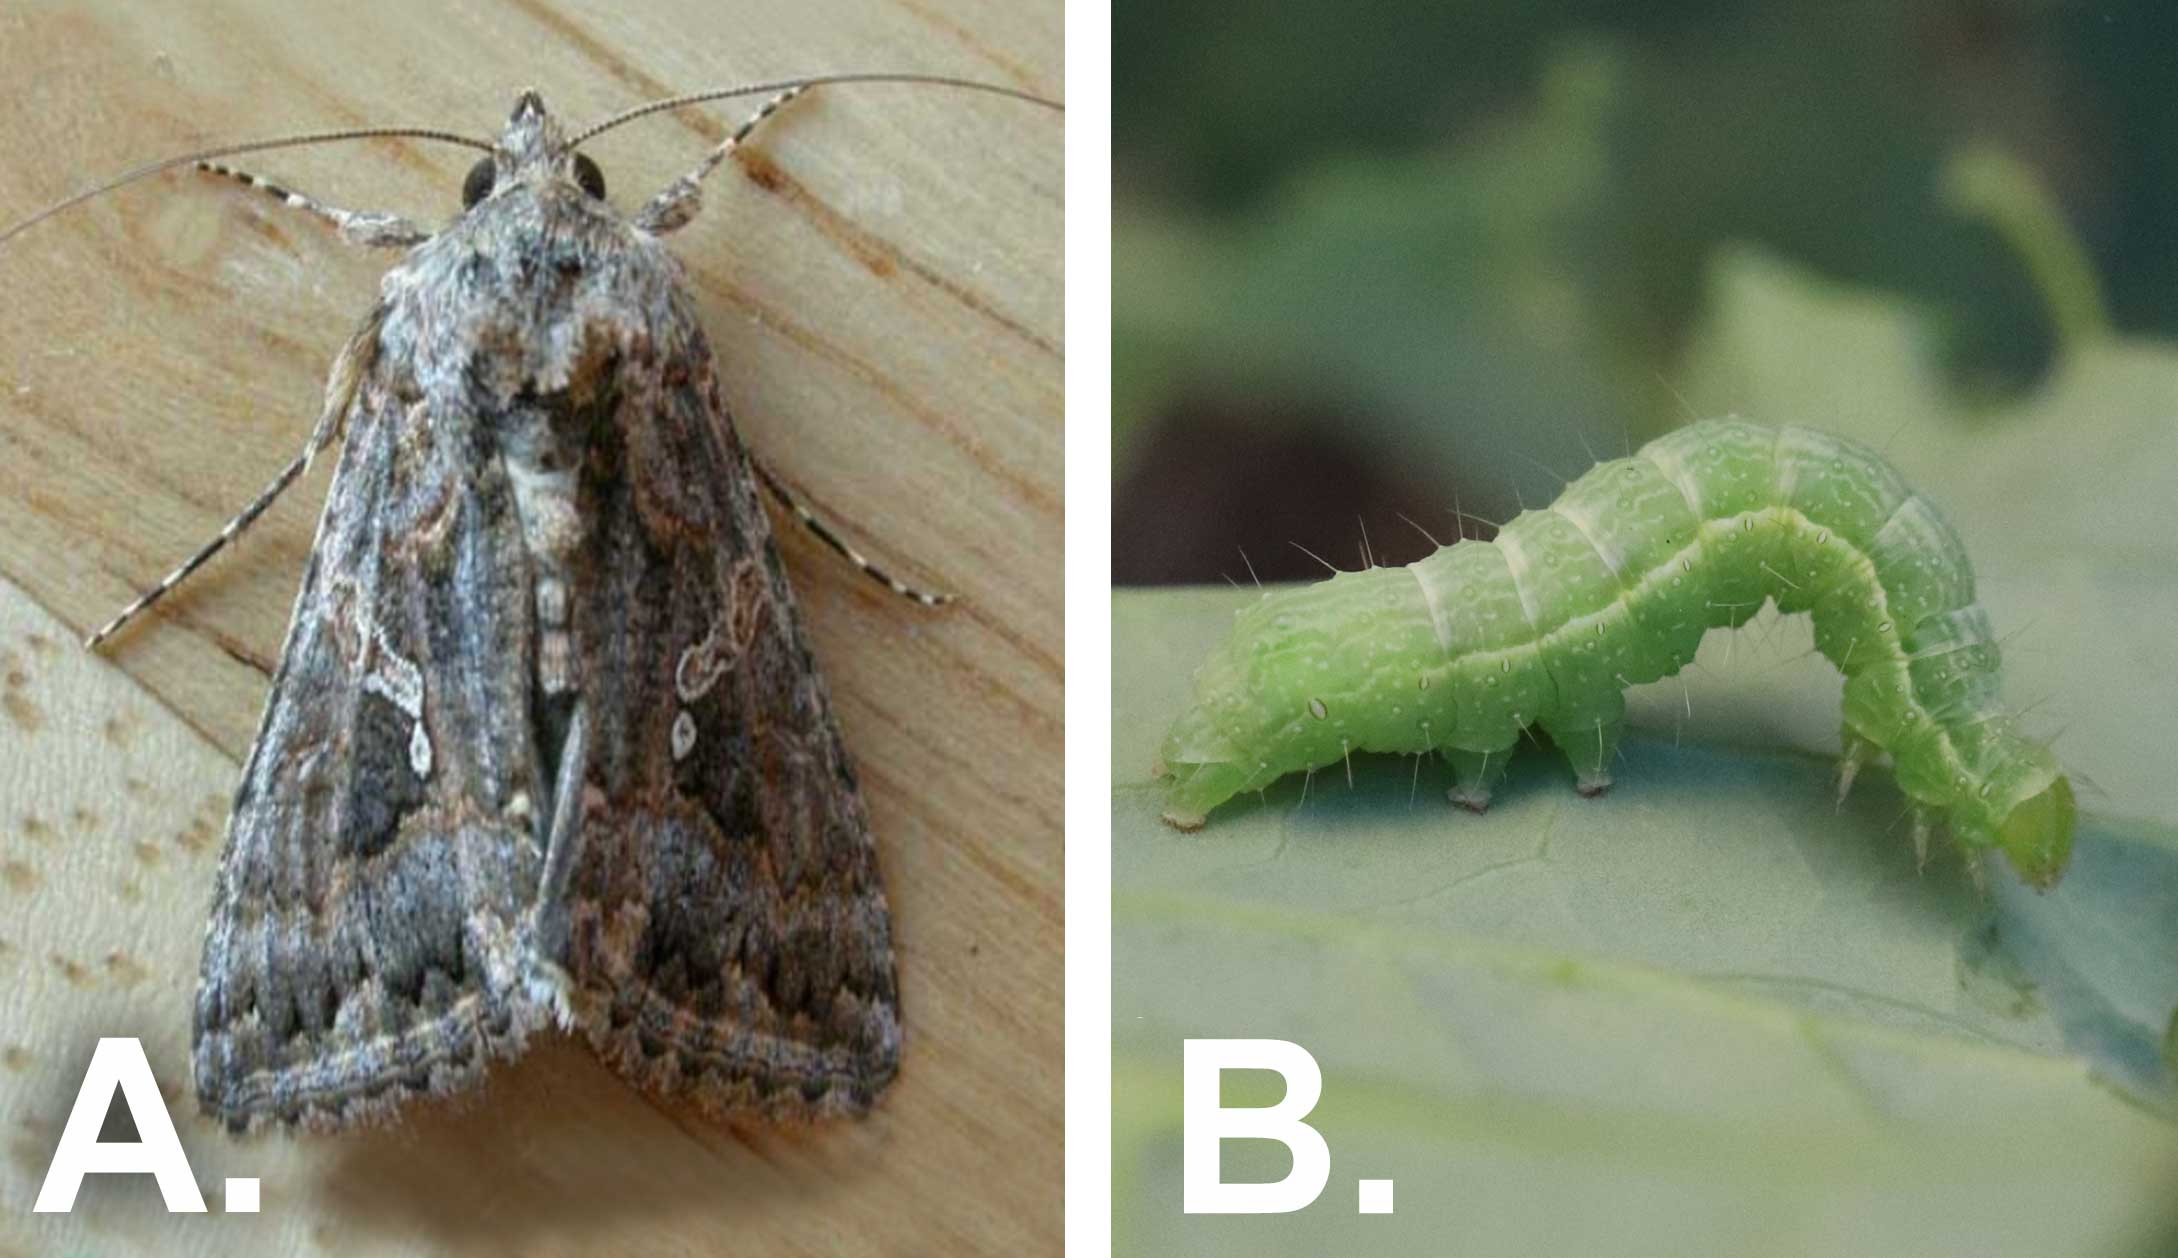 Left: Brown moth with light markings on the wings. Right: Green caterpillar with a white line on the side of its body on a green leaf.